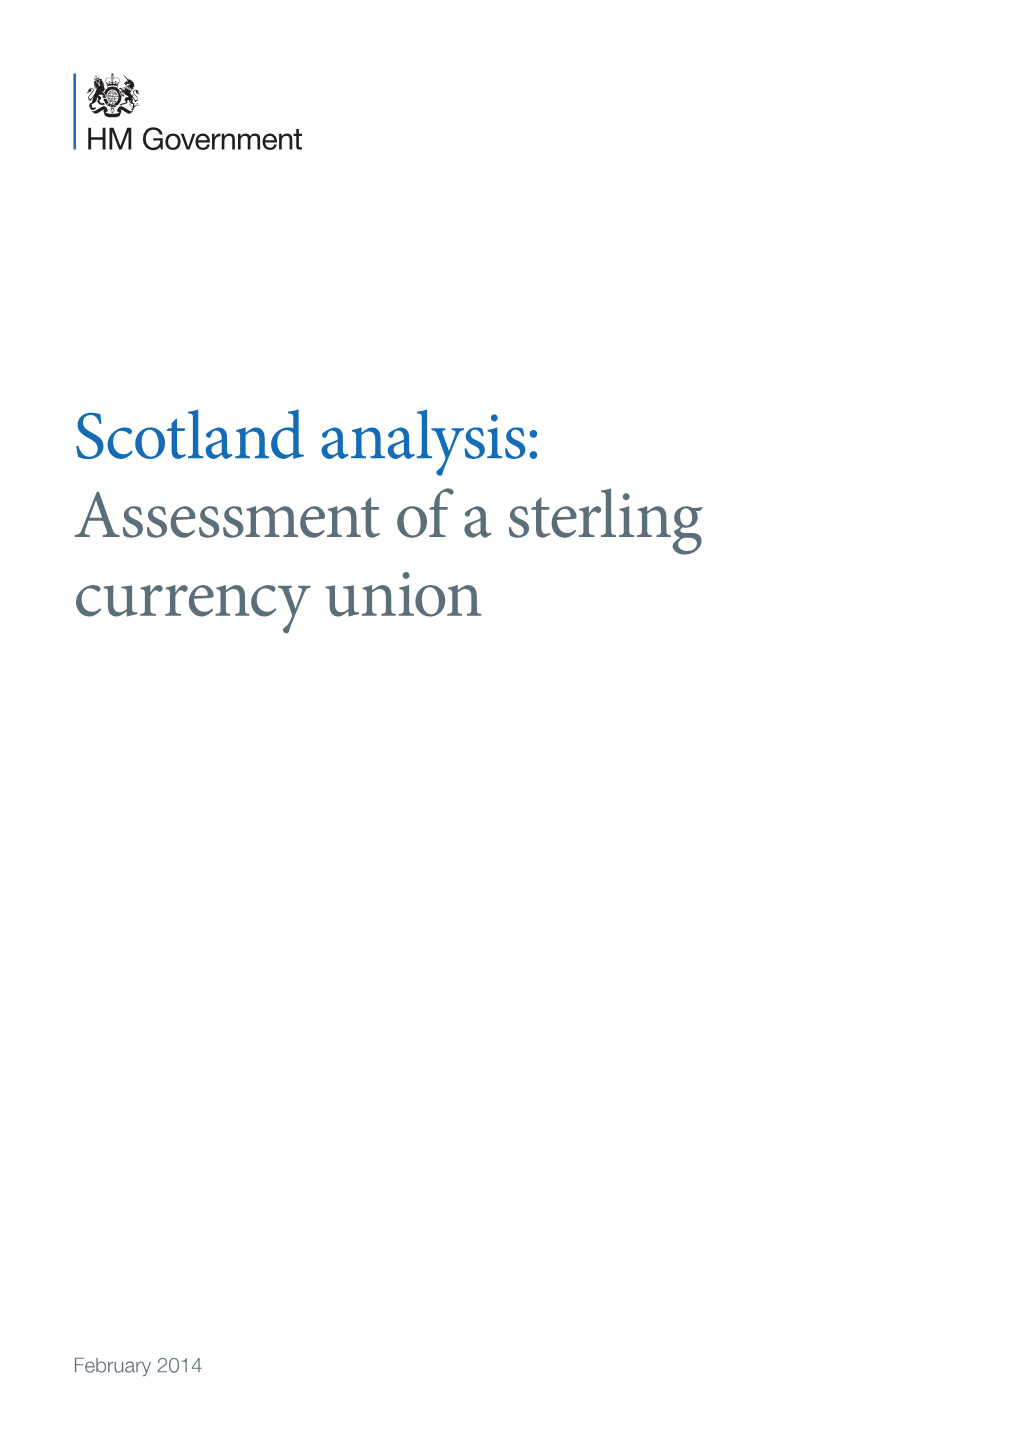 Scotland Analysis: Assessment of a Sterling Currency Union